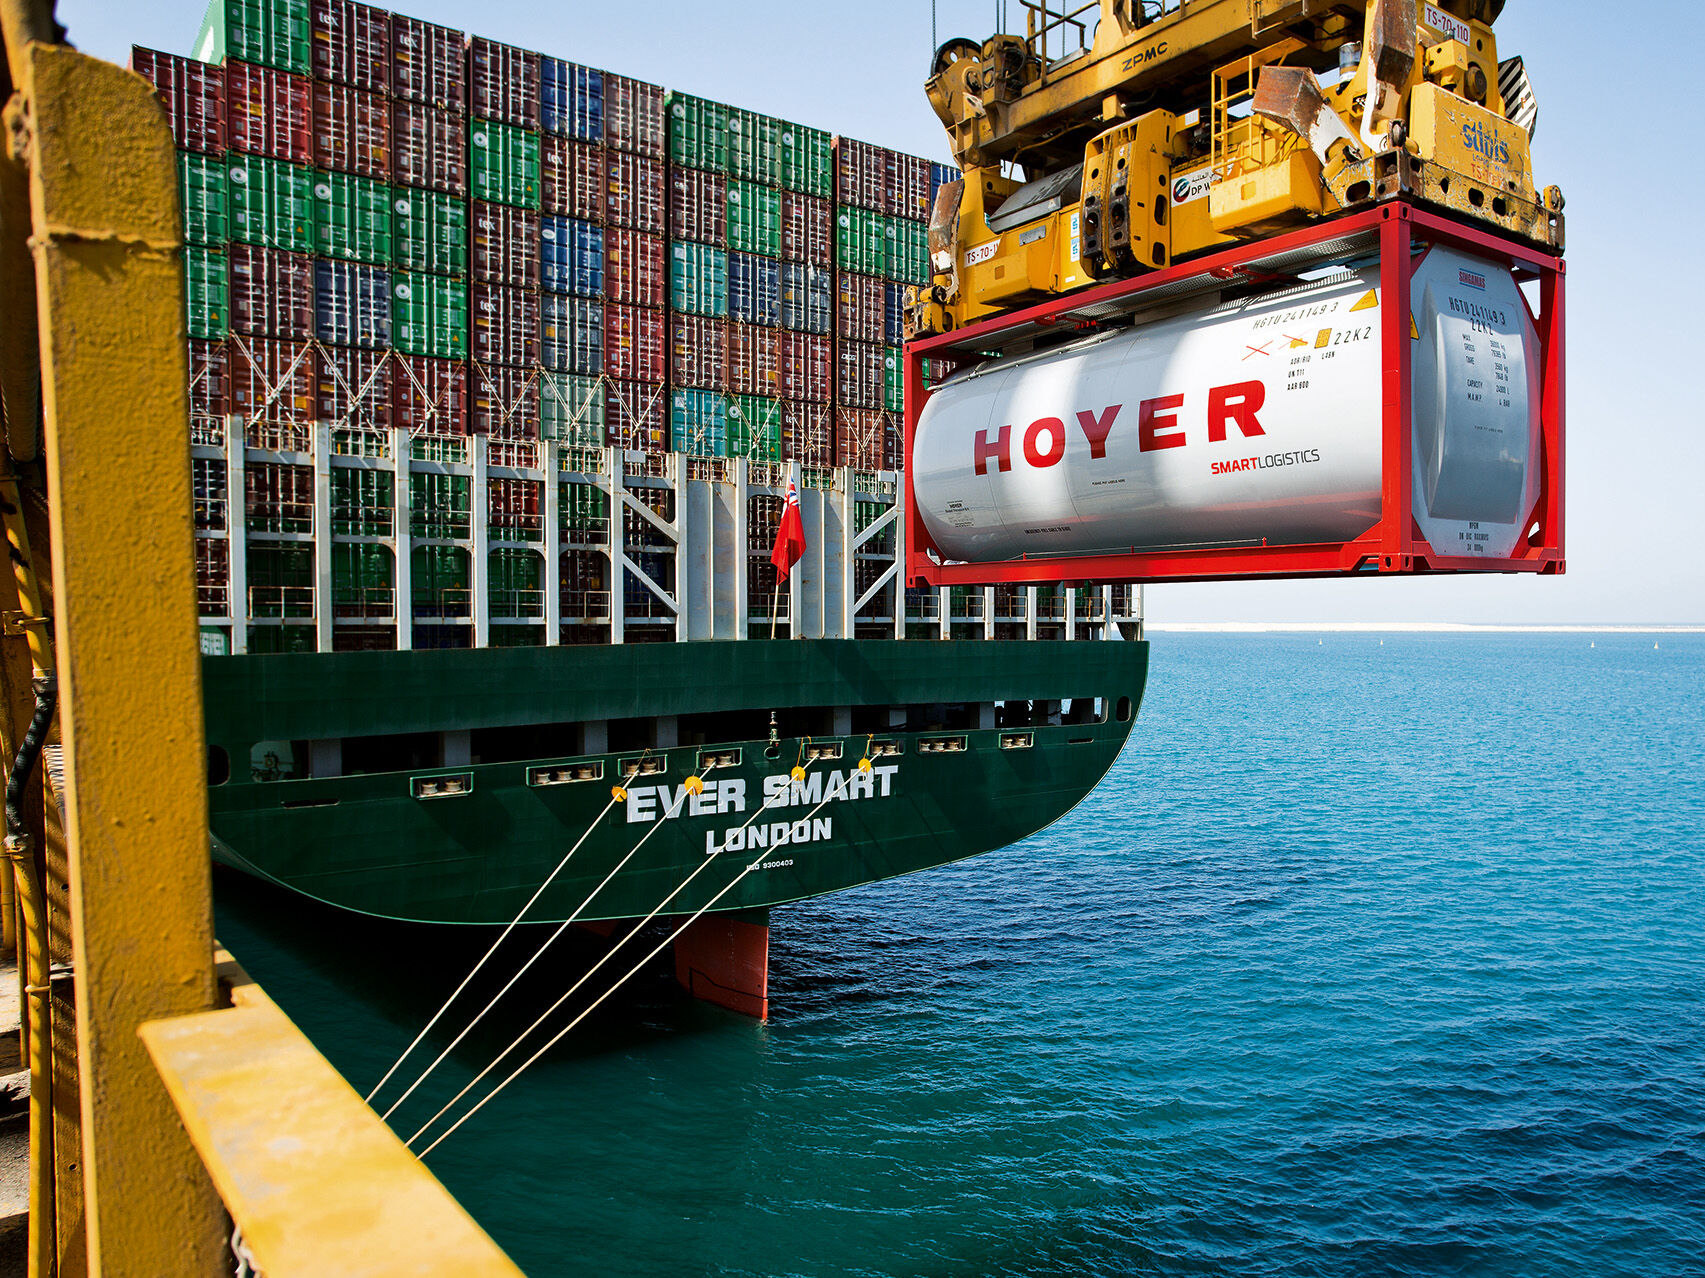 HOYER tankcontainer smart logistics on a crane over the sea in front of a container ship